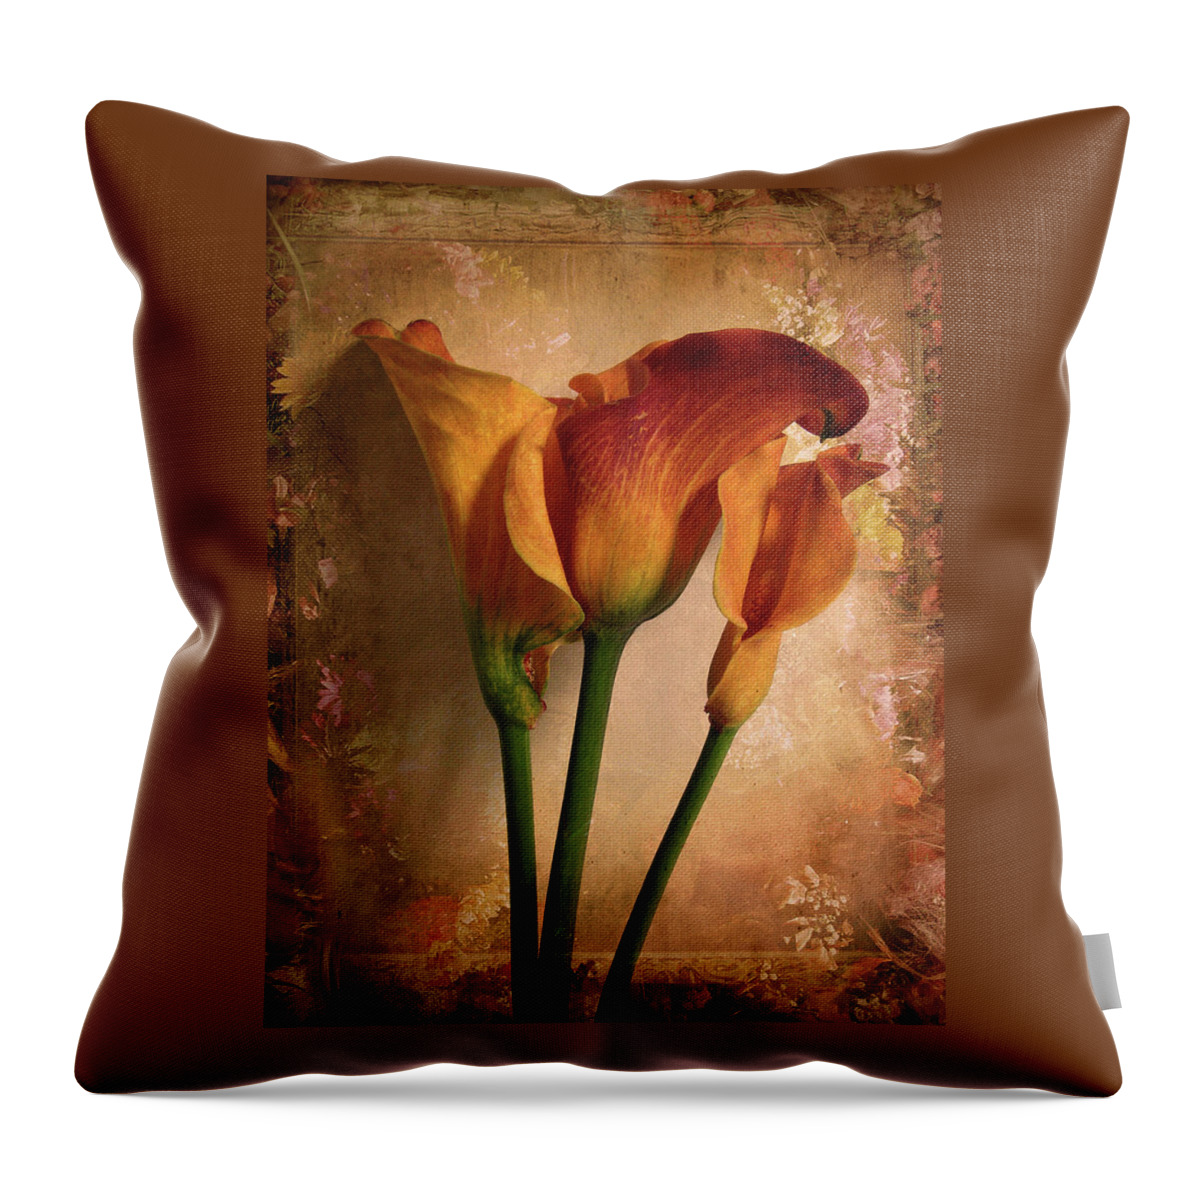 Flower Throw Pillow featuring the photograph Vintage Calla Lily by Jessica Jenney